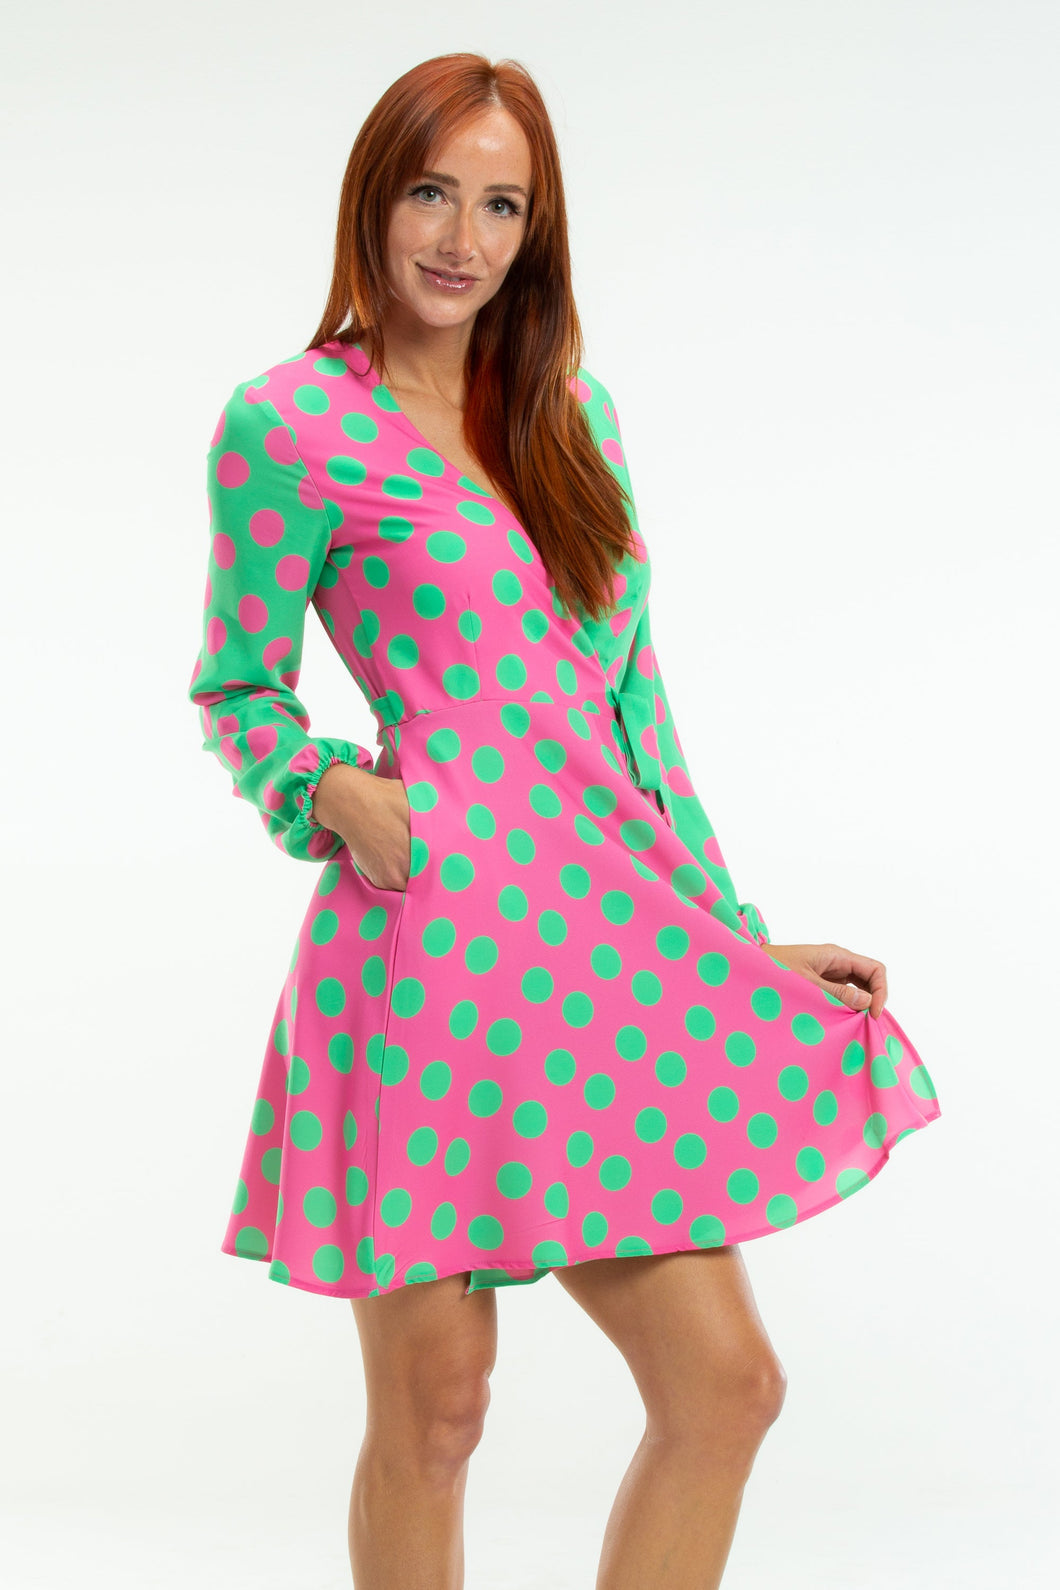 The High Stakes | Derby Pink And Green Polka Dot Wrap Dress